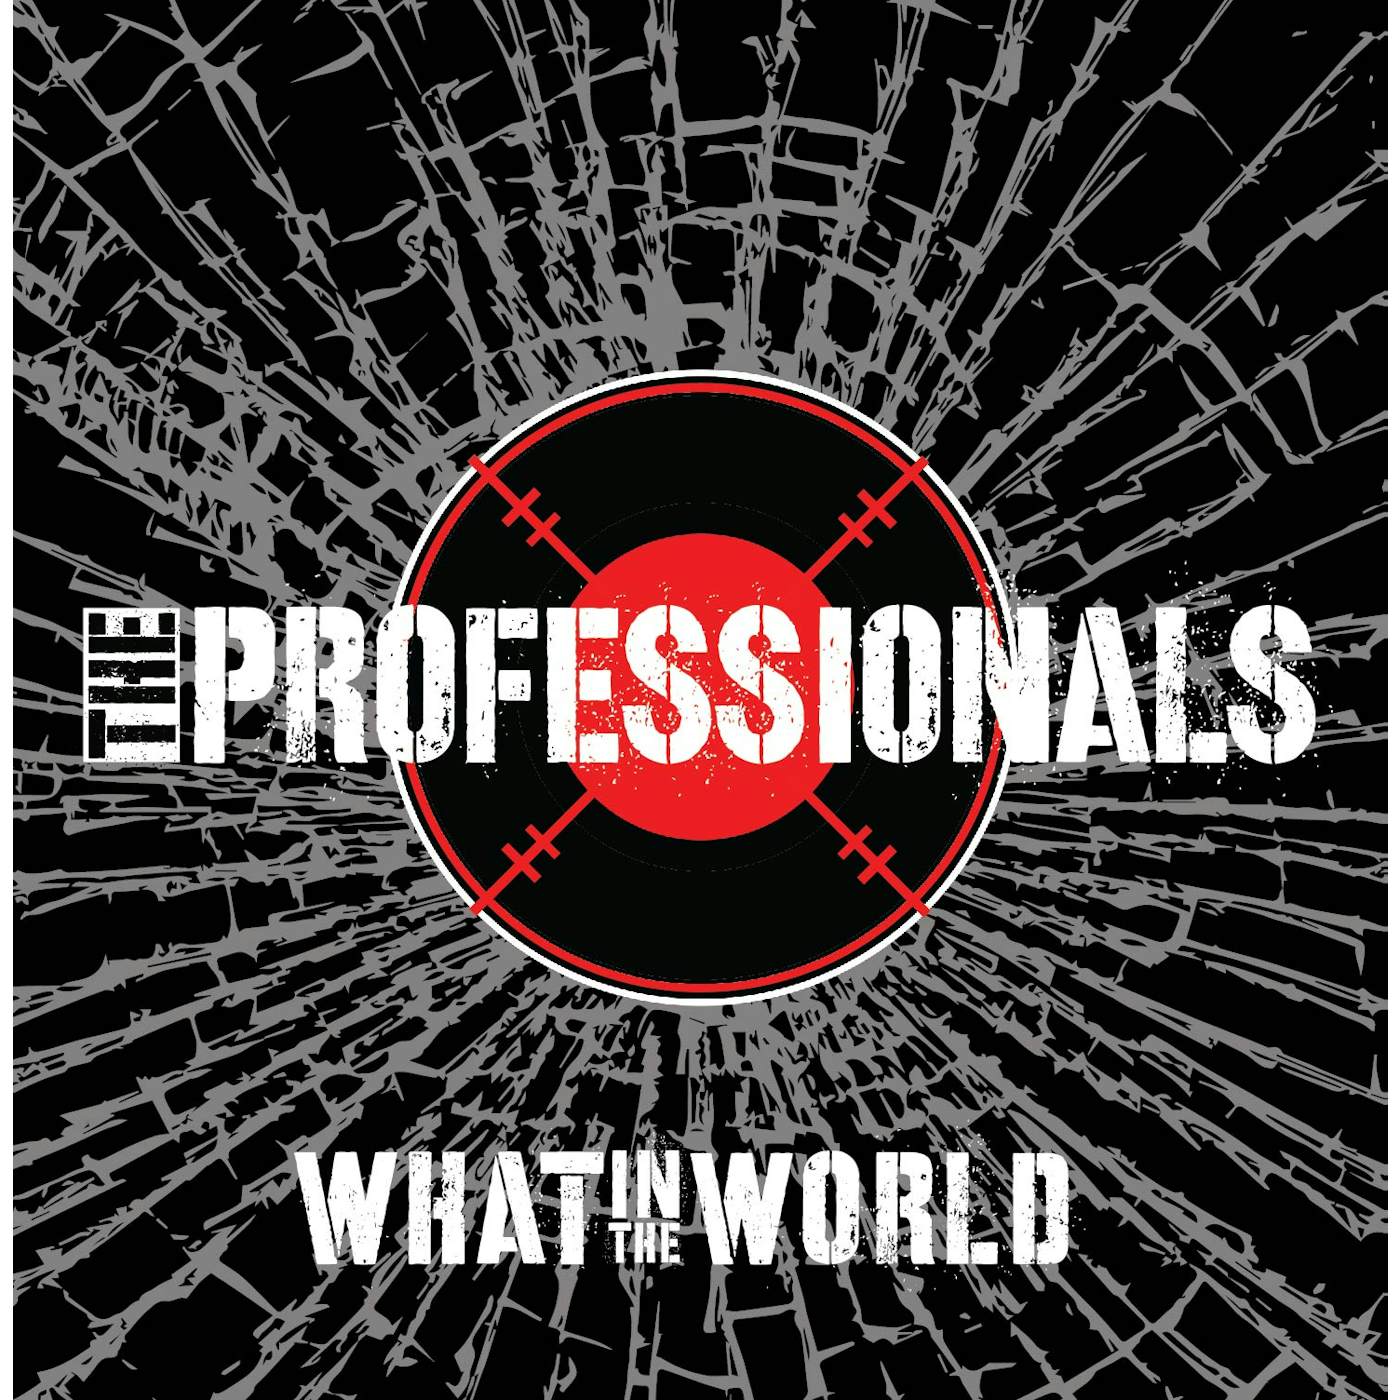 The Professionals What In the World Vinyl Record